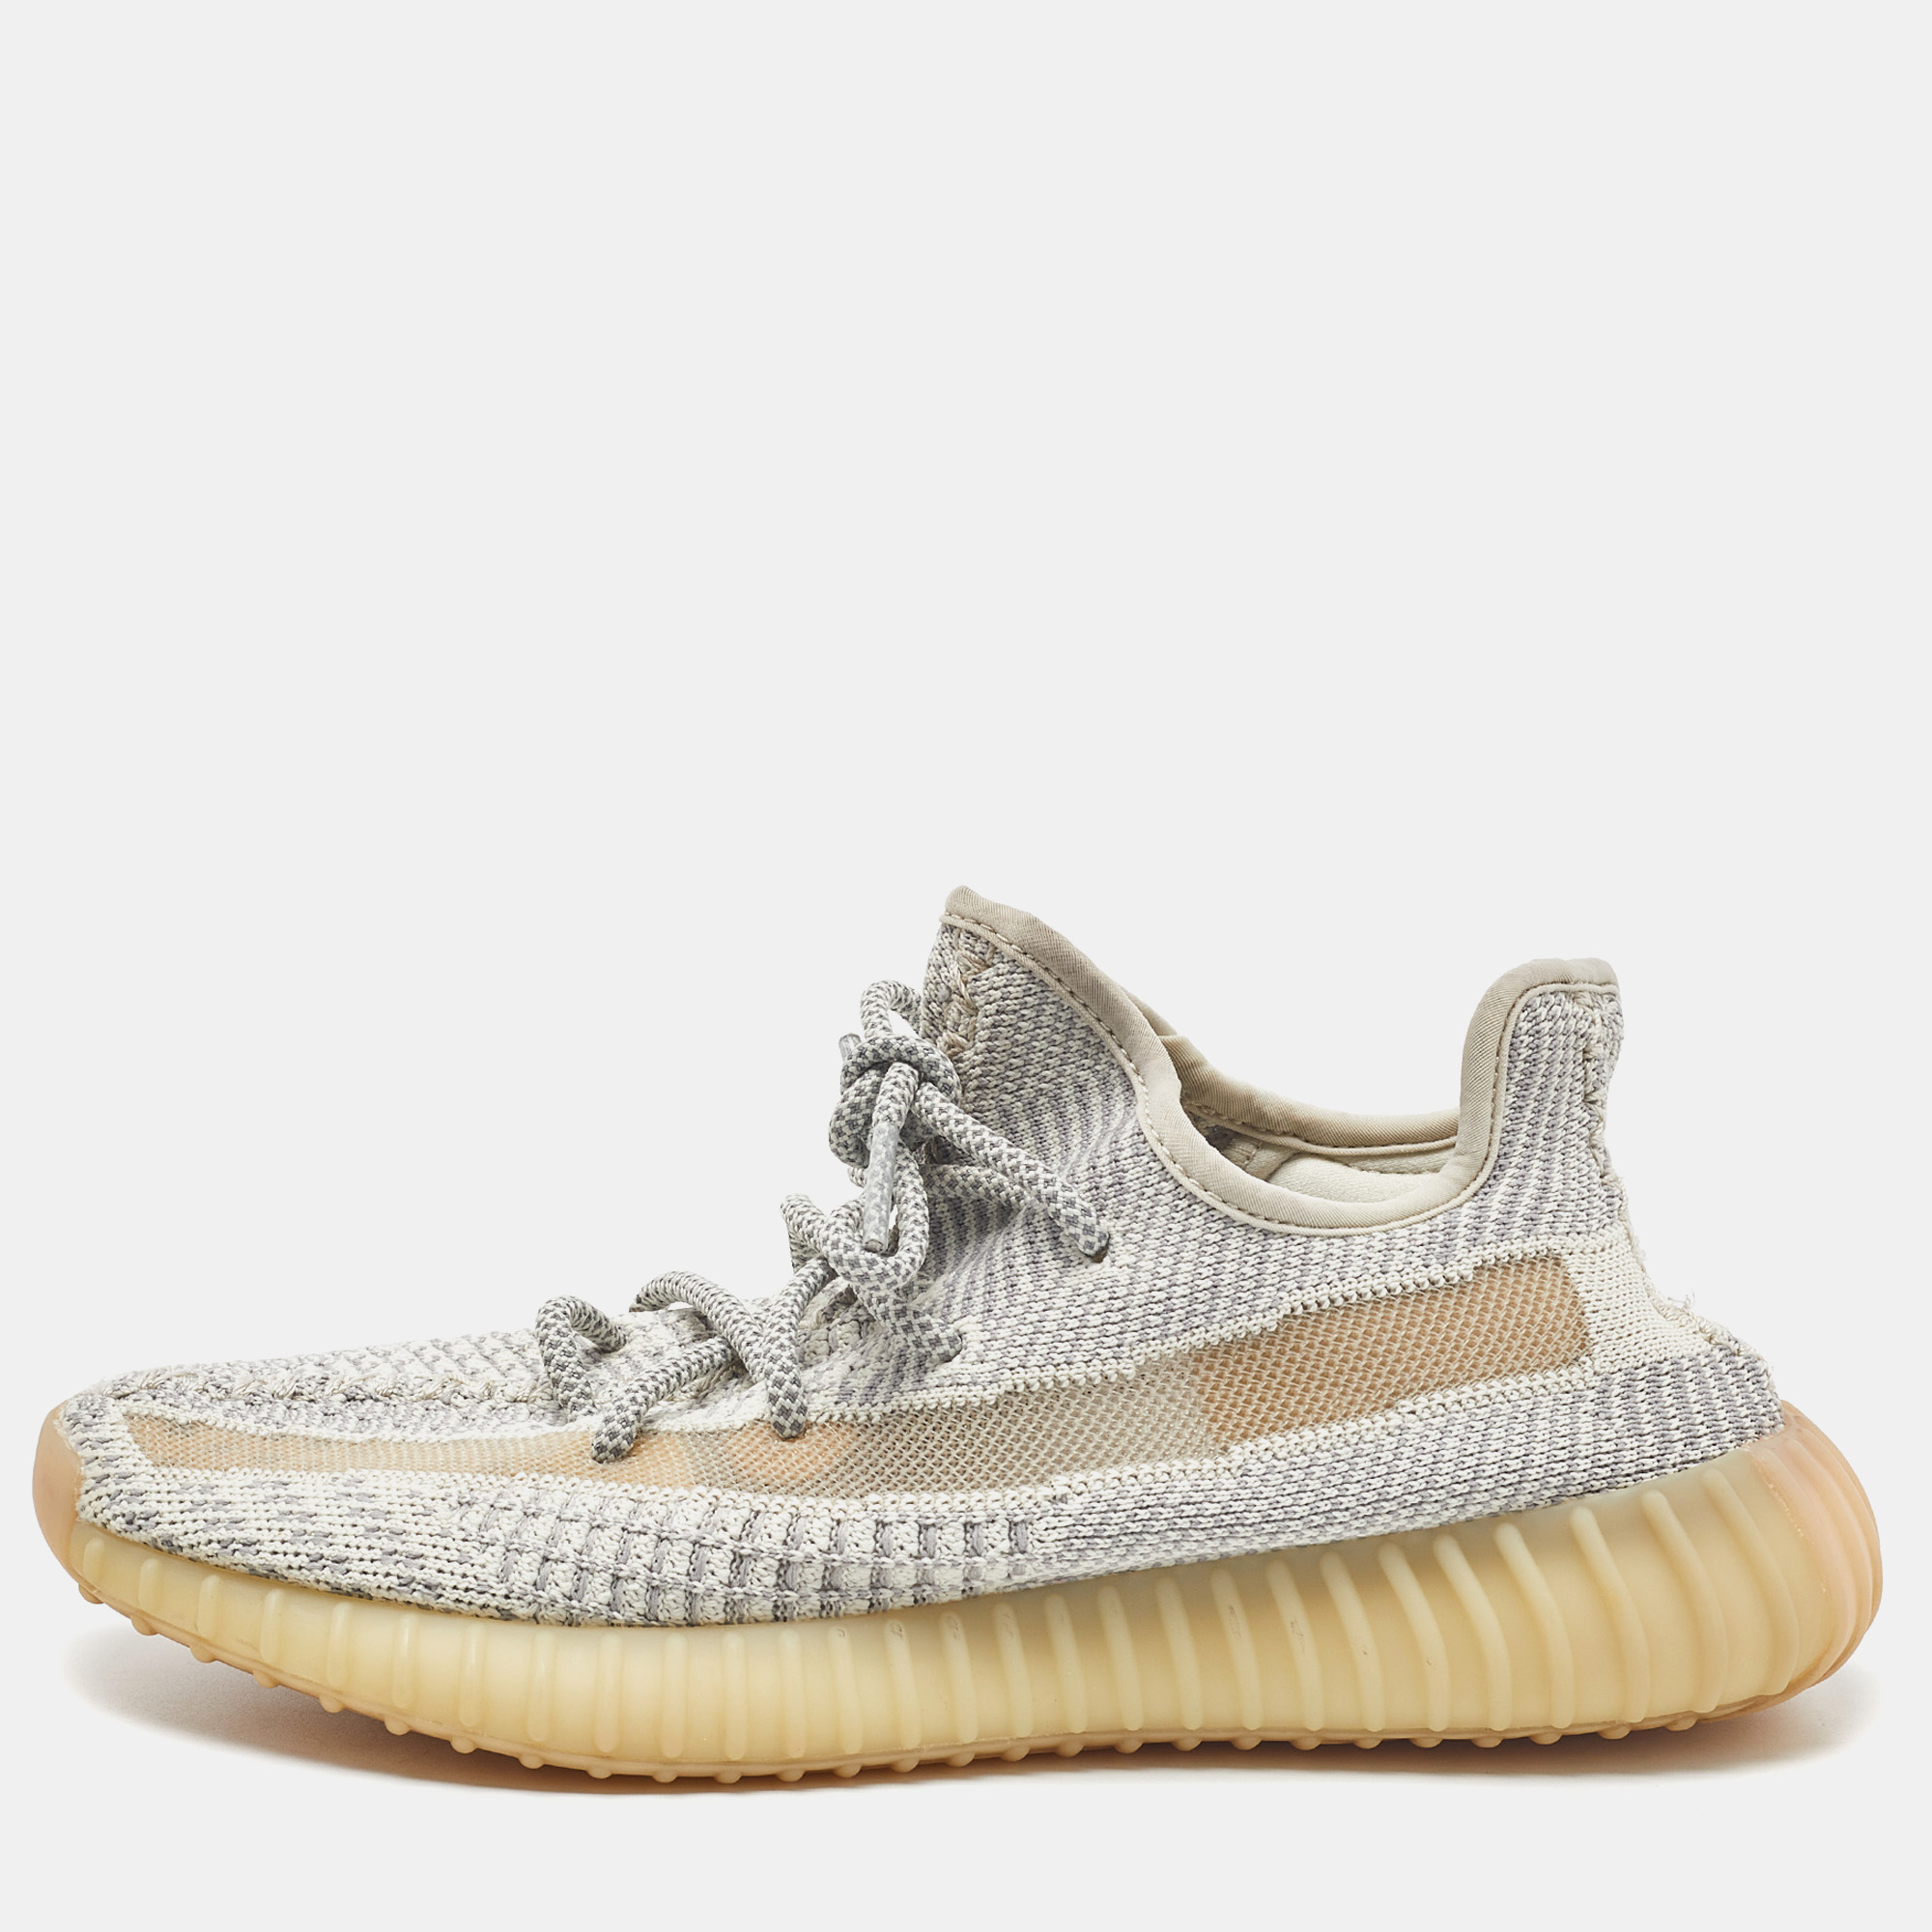 

Yeezy x Adidas Boost 350 V2 Lundmark Non-Reflective Sneakers Size  1/3, Beige